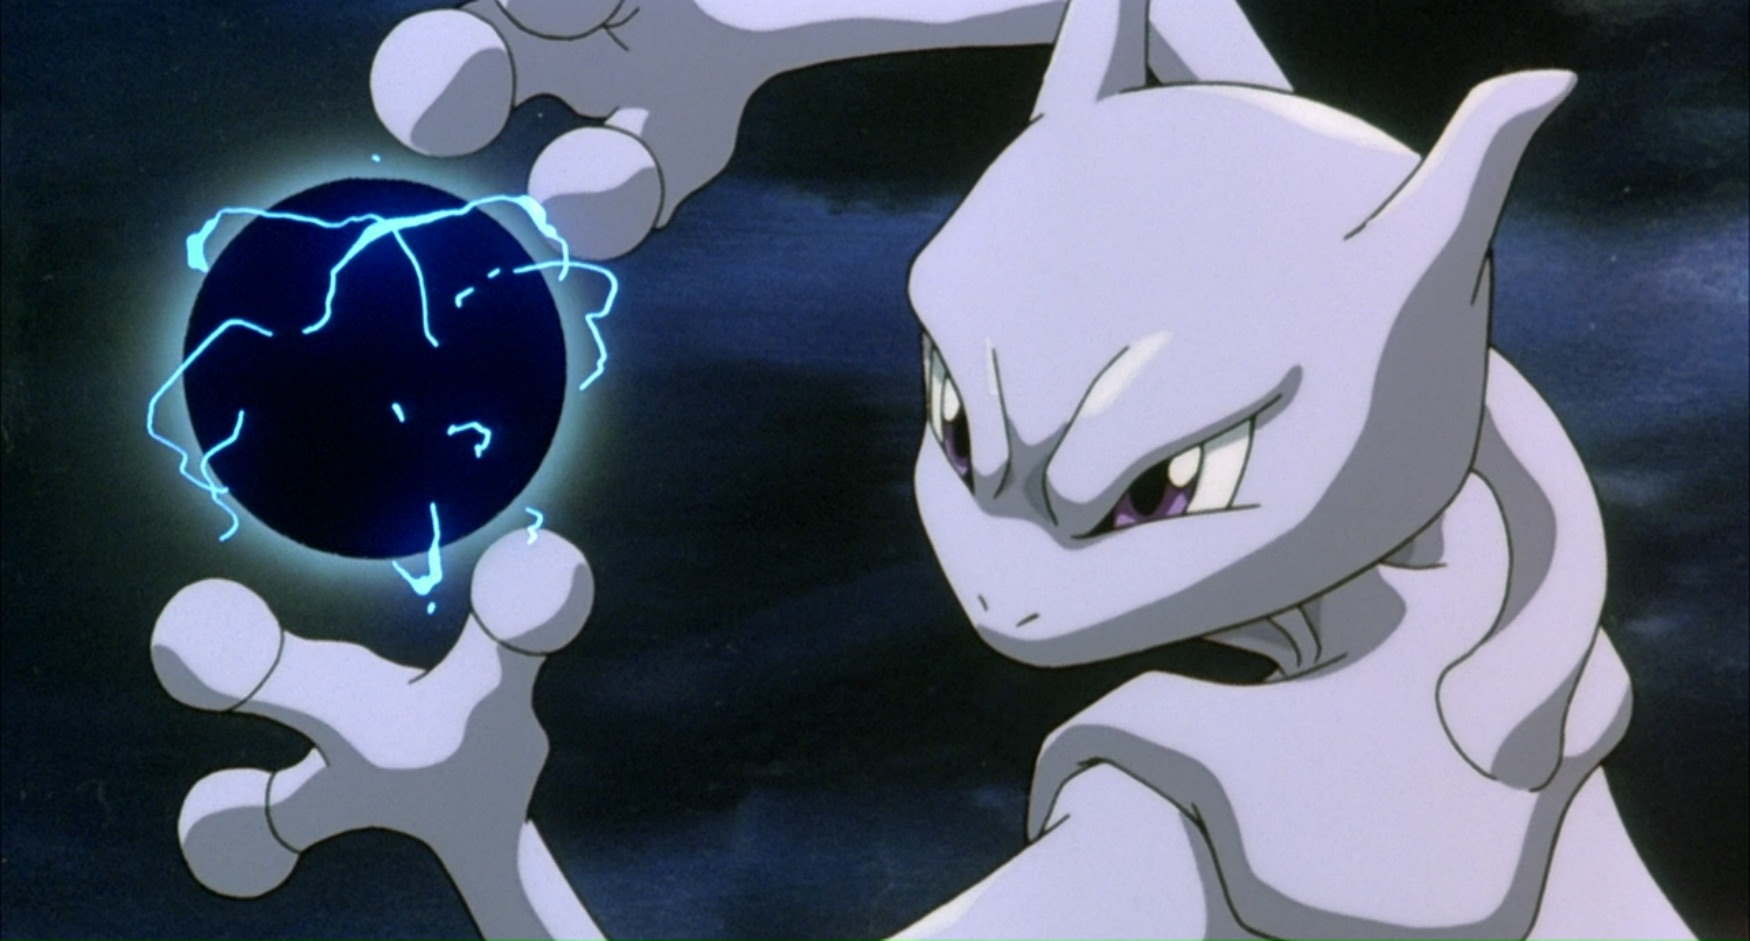 Mewtwo using Shadow ball (used in Pokemon Go Pay to win)